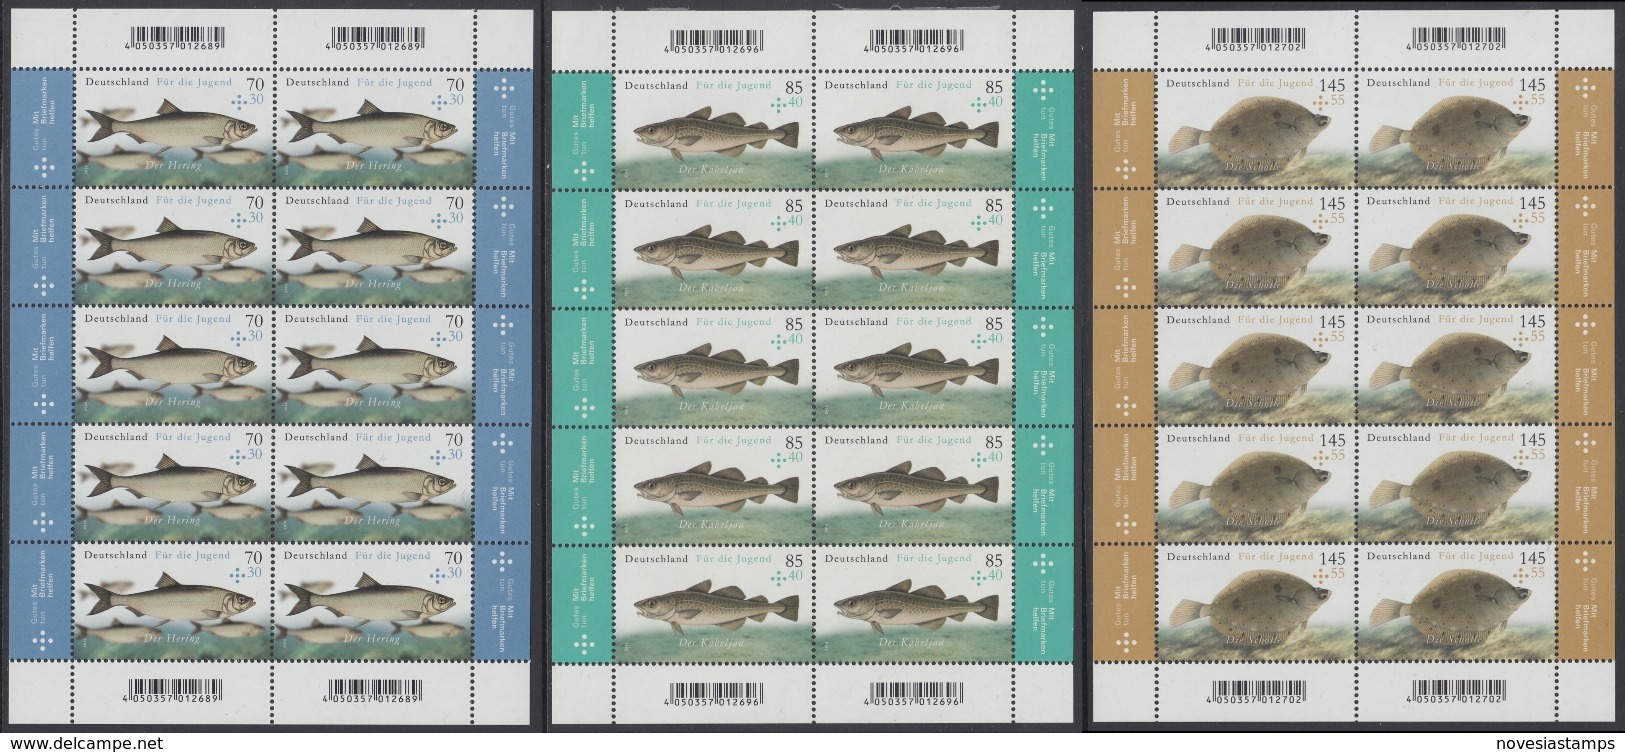 !a! GERMANY 2016 Mi. 3255-3257 MNH SET Of 3 SHEETS(10 Each) - Native Saltwater Fishes - 2011-2020